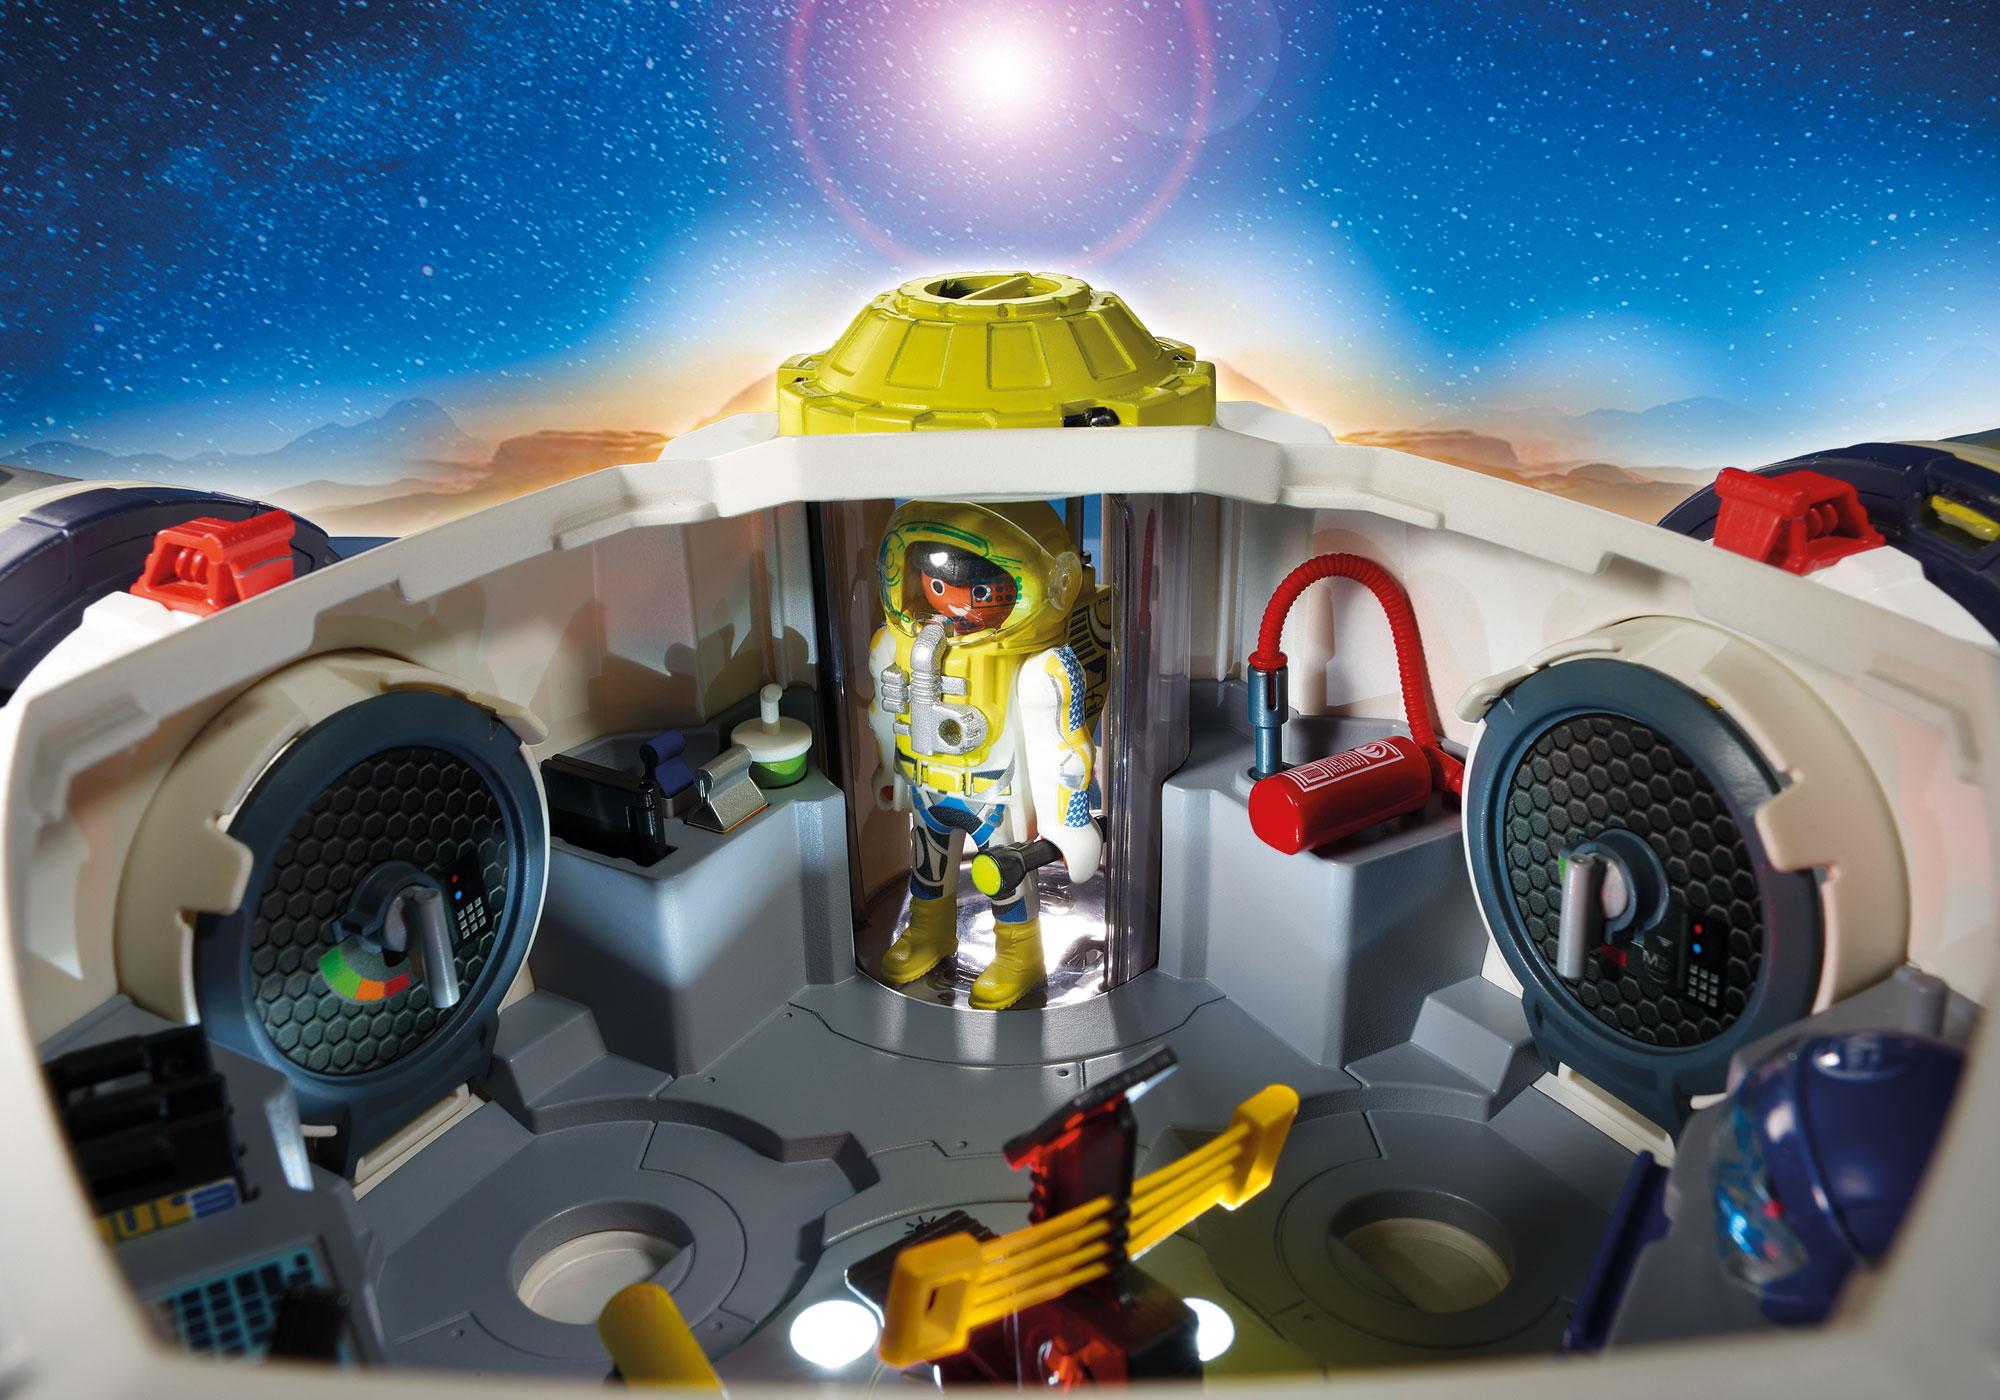 station spatiale playmobil